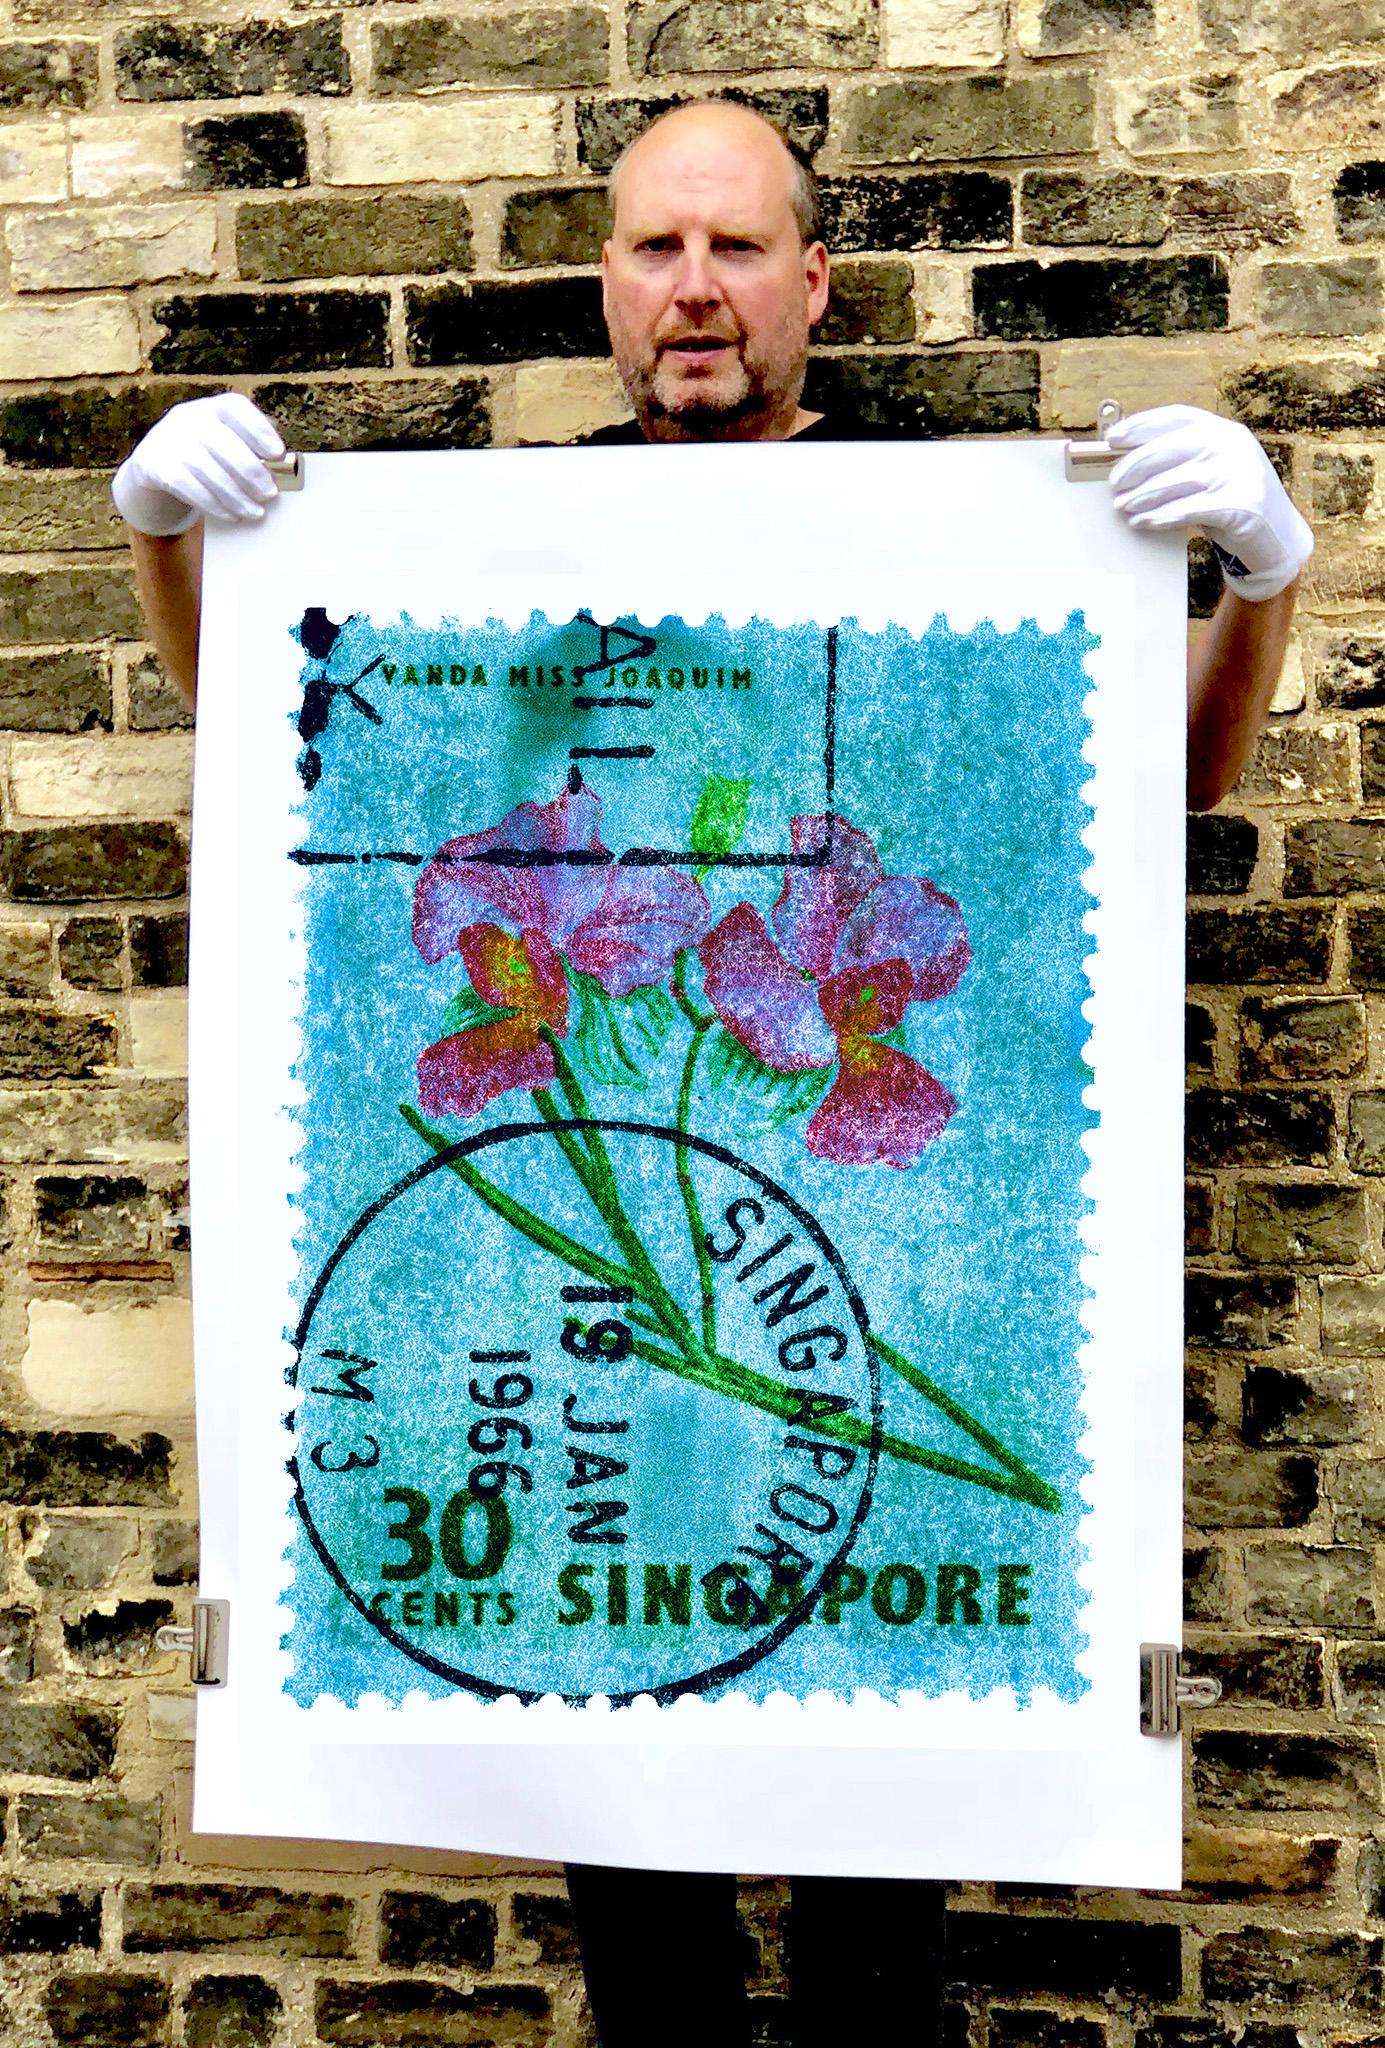 Singapore Stamp Collection, 30c Singapore Orchid Blue - Floral color photo - Photograph by Heidler & Heeps